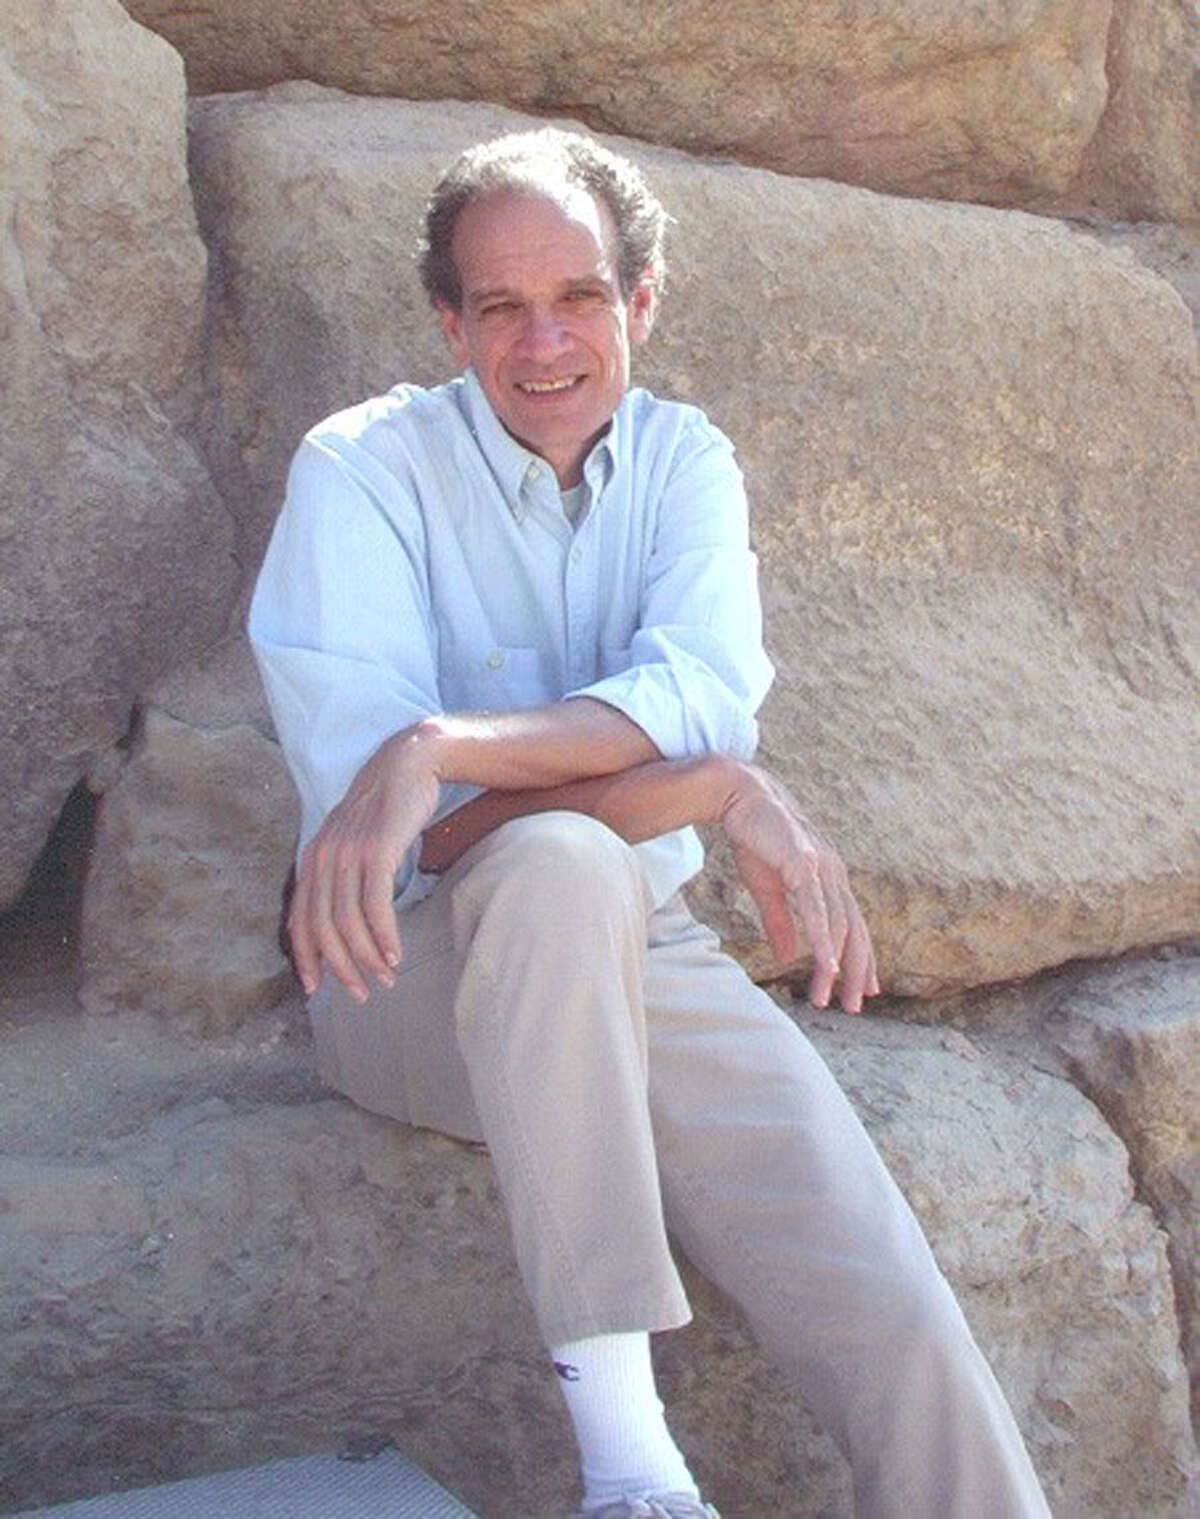 Robert Brier, recognized as one of the world’s foremost Egyptologists, will address the New Canaan Men’s Club in Morrill Hall at St. Mark’s Church, Friday, Feb. 22 at 10 a.m.